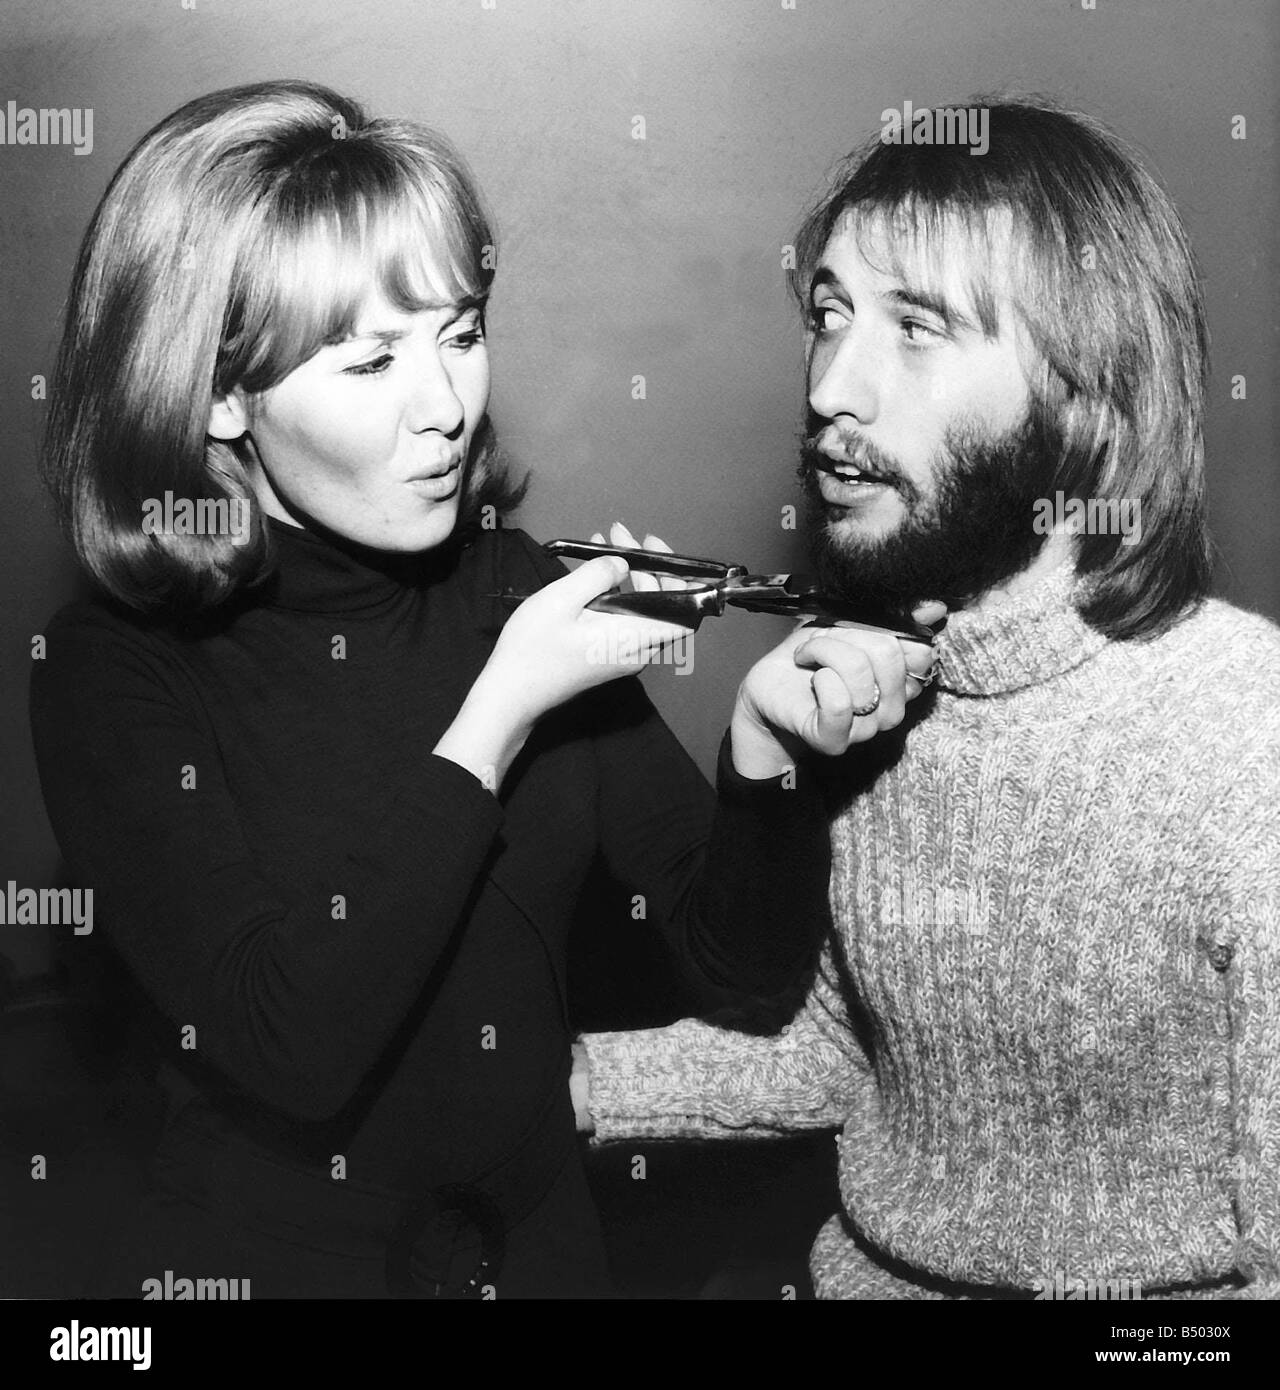 Lulu singer giving husband Maurice Gibb of the Bee Gees a shave Stock Photo